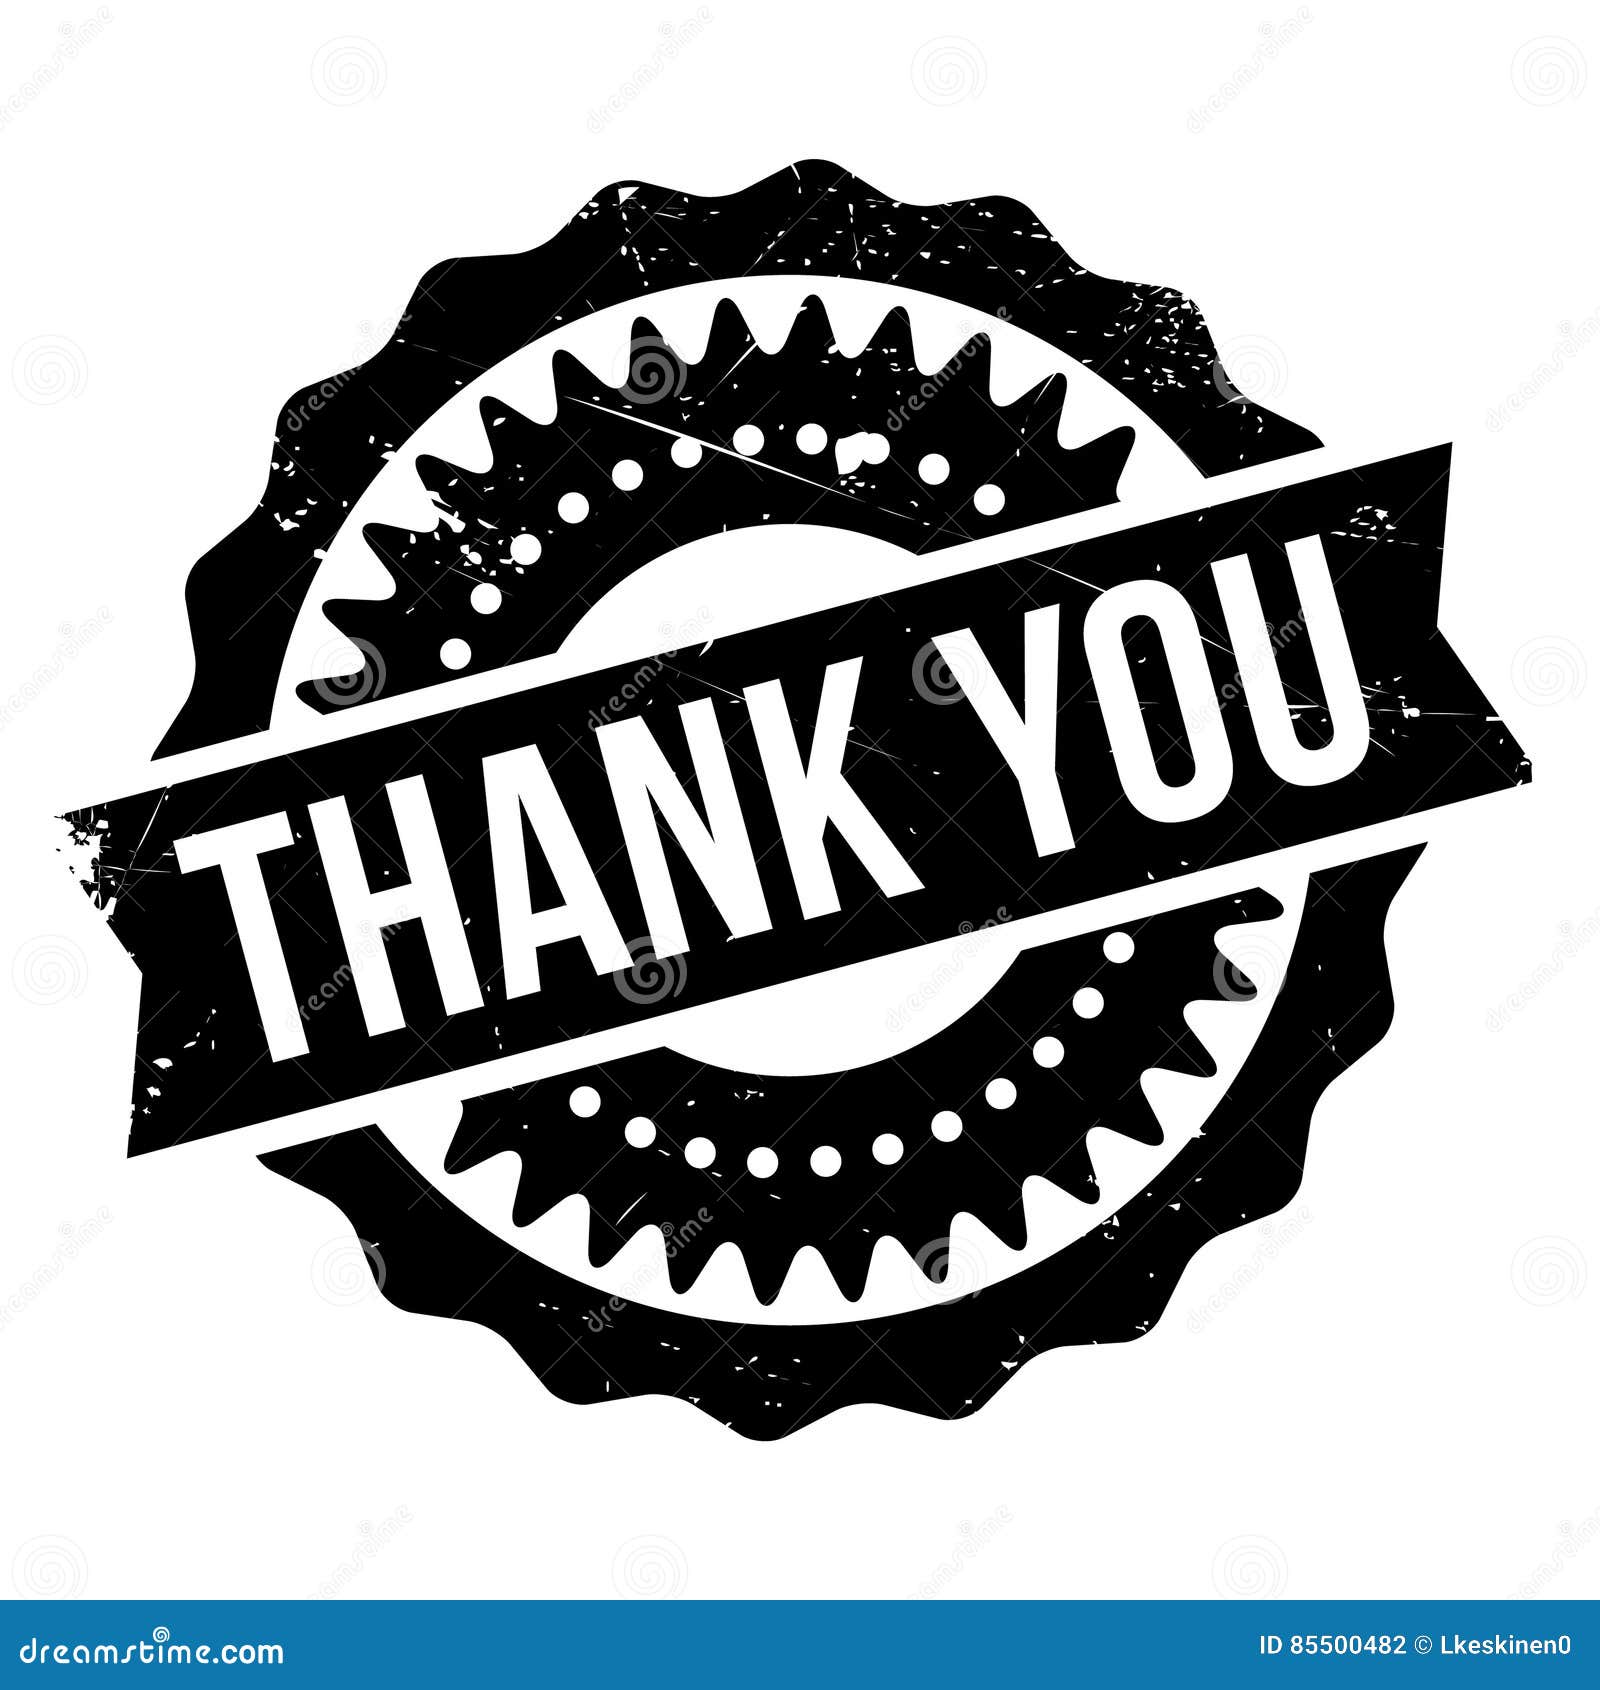 Thank you stamp stock vector. Illustration of background - 21724092